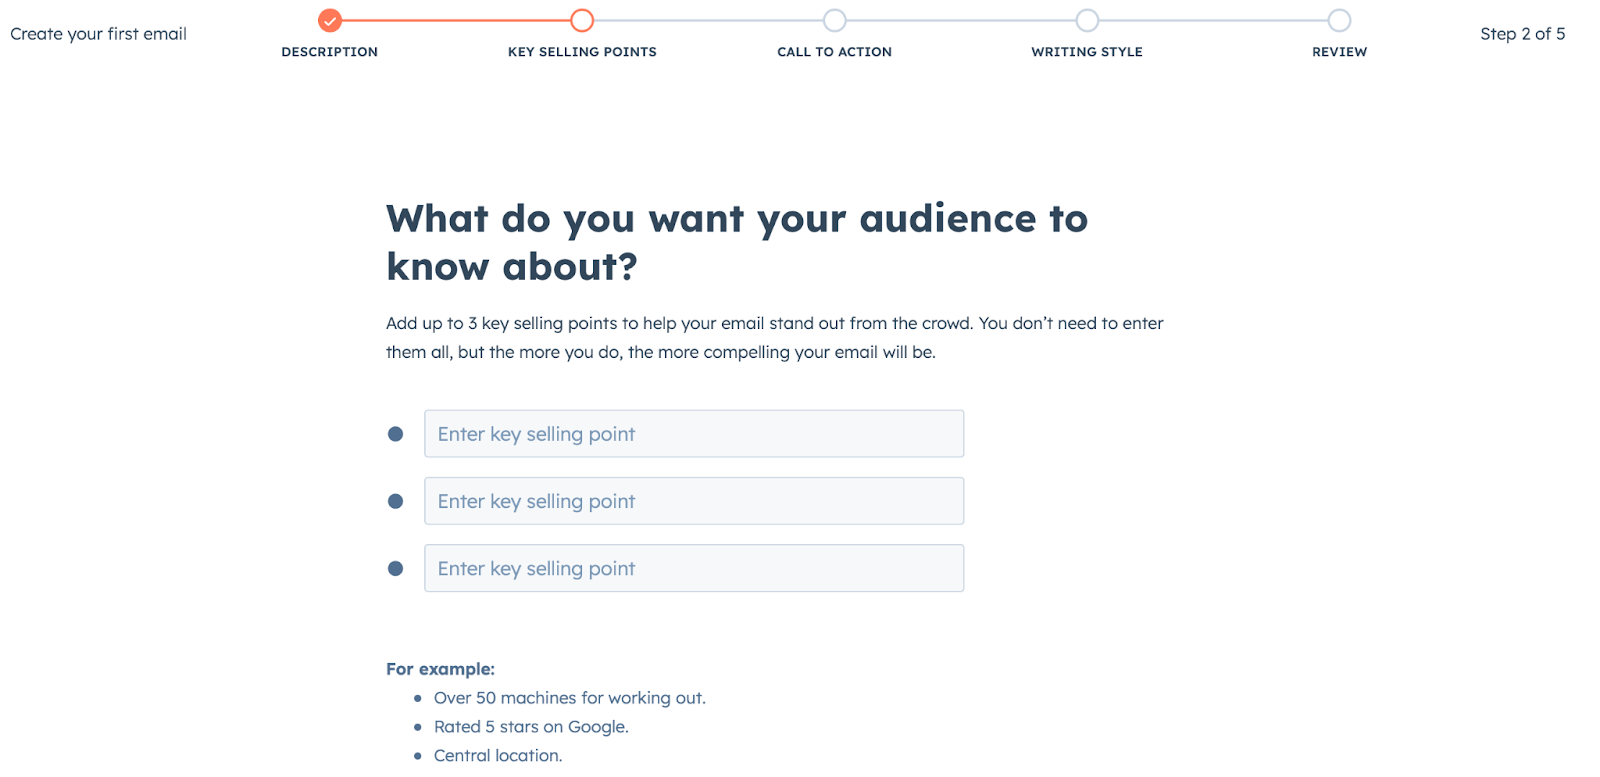 Screenshot of HubSpot's AI Email Writer that consists of 5 steps, from description of your campaign to review.